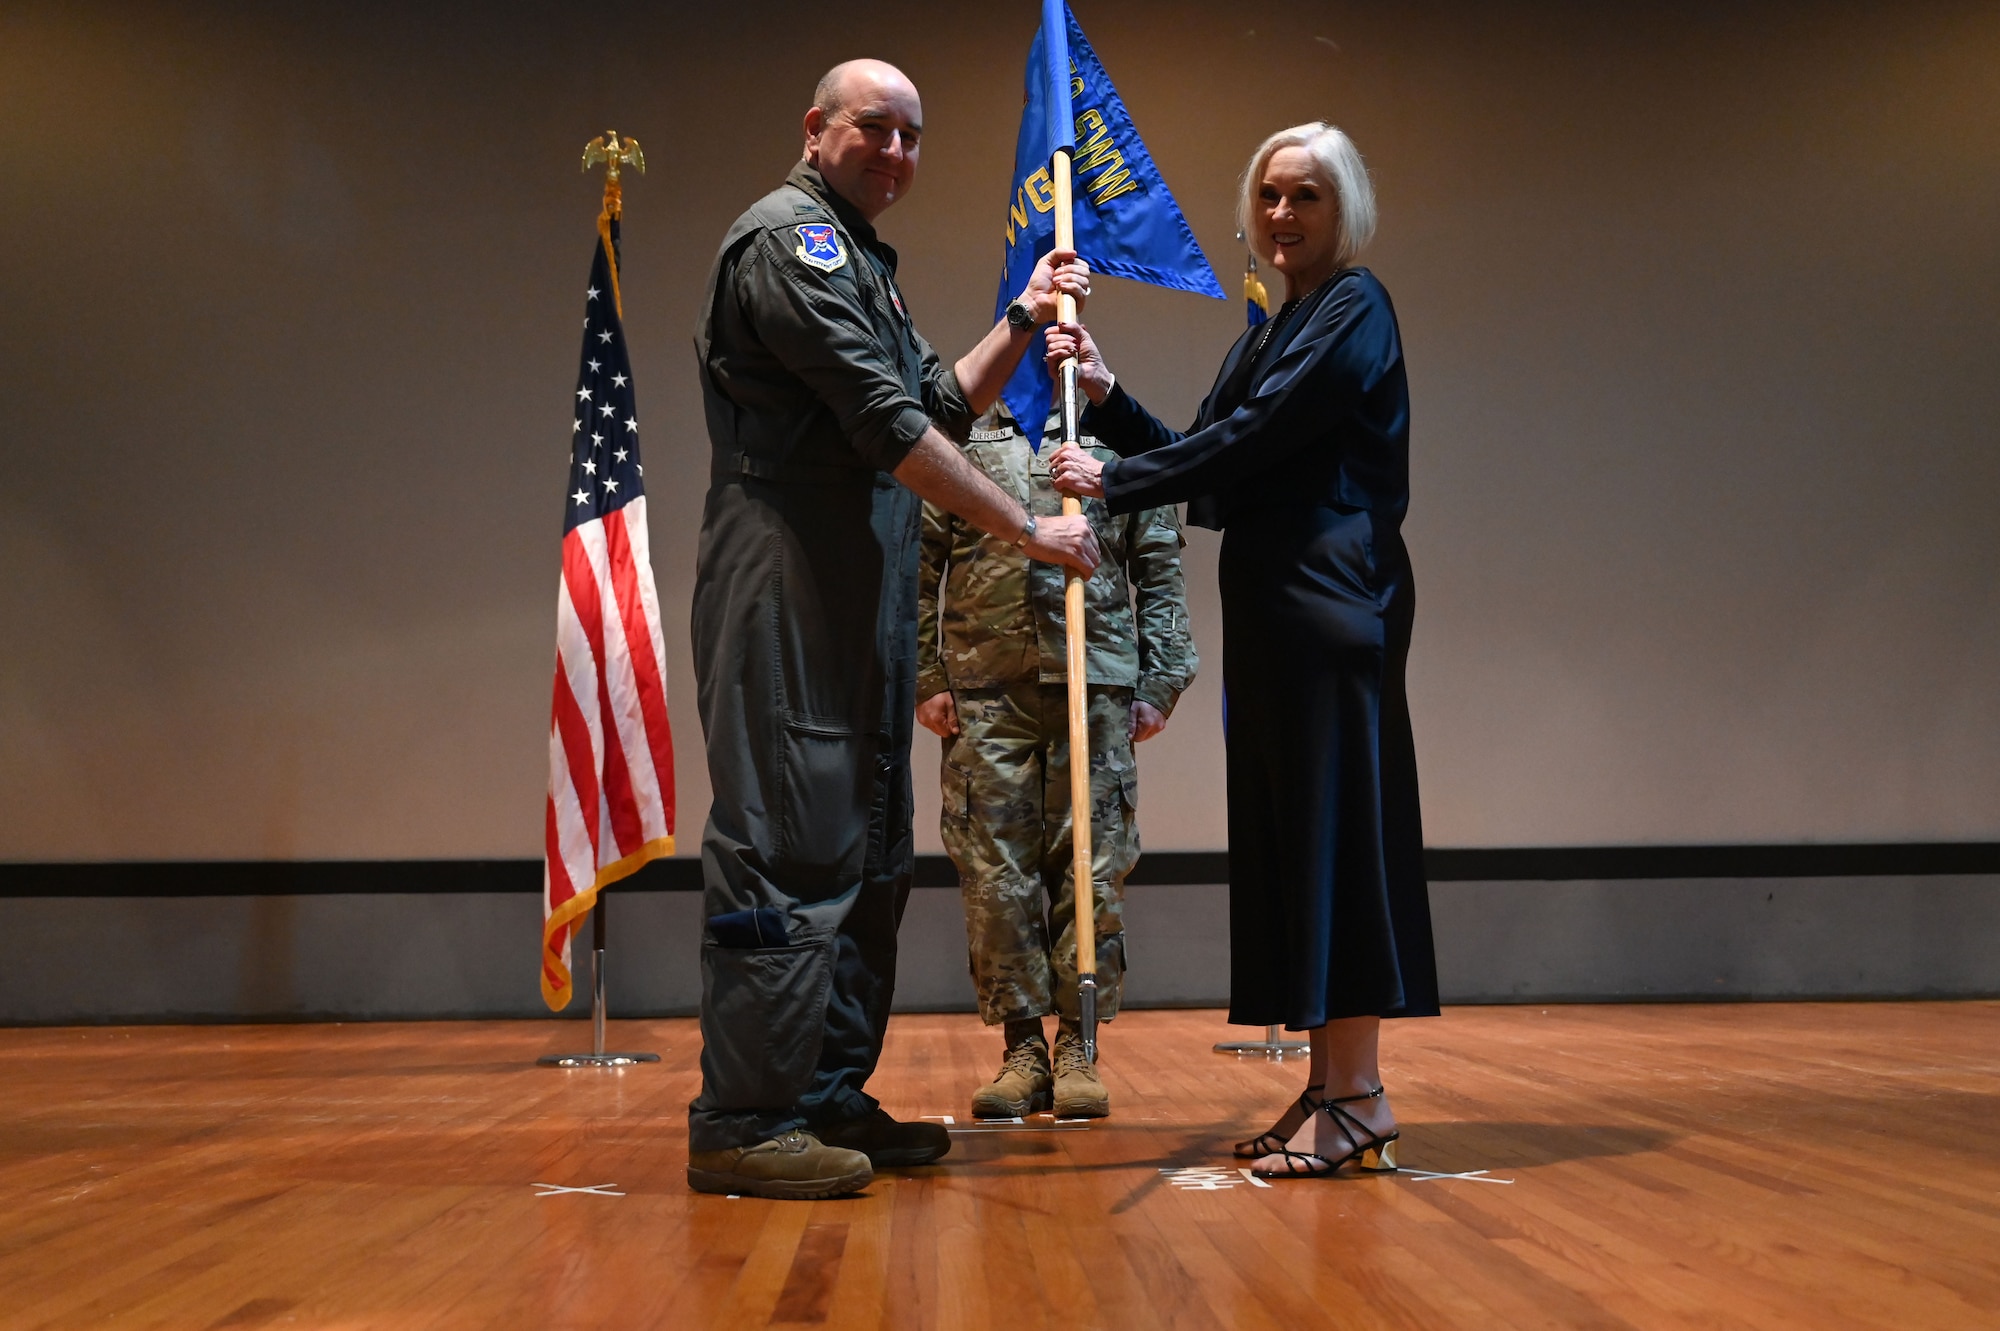 U.S. Air Force Col. Mike Cocke, 350th Spectrum Warfare Group commander, inducts Mitzi Henley, president and CEO of Wright Shopping Center, president and CEO of Sunset Property Development Inc., and member of the Emerald Coast Military Affairs Committee, during the wing’s first Honorary Commander Induction ceremony, at Eglin Air Force Base, Fla., Dec. 1, 2023. Honorary Commanders serve as the liaison between the 350th Spectrum Warfare Wing and the surrounding community by maintaining strong relations through mutually beneficial professional partnership. (U.S. Air Force photo by Staff Sgt. Ericka A. Woolever)